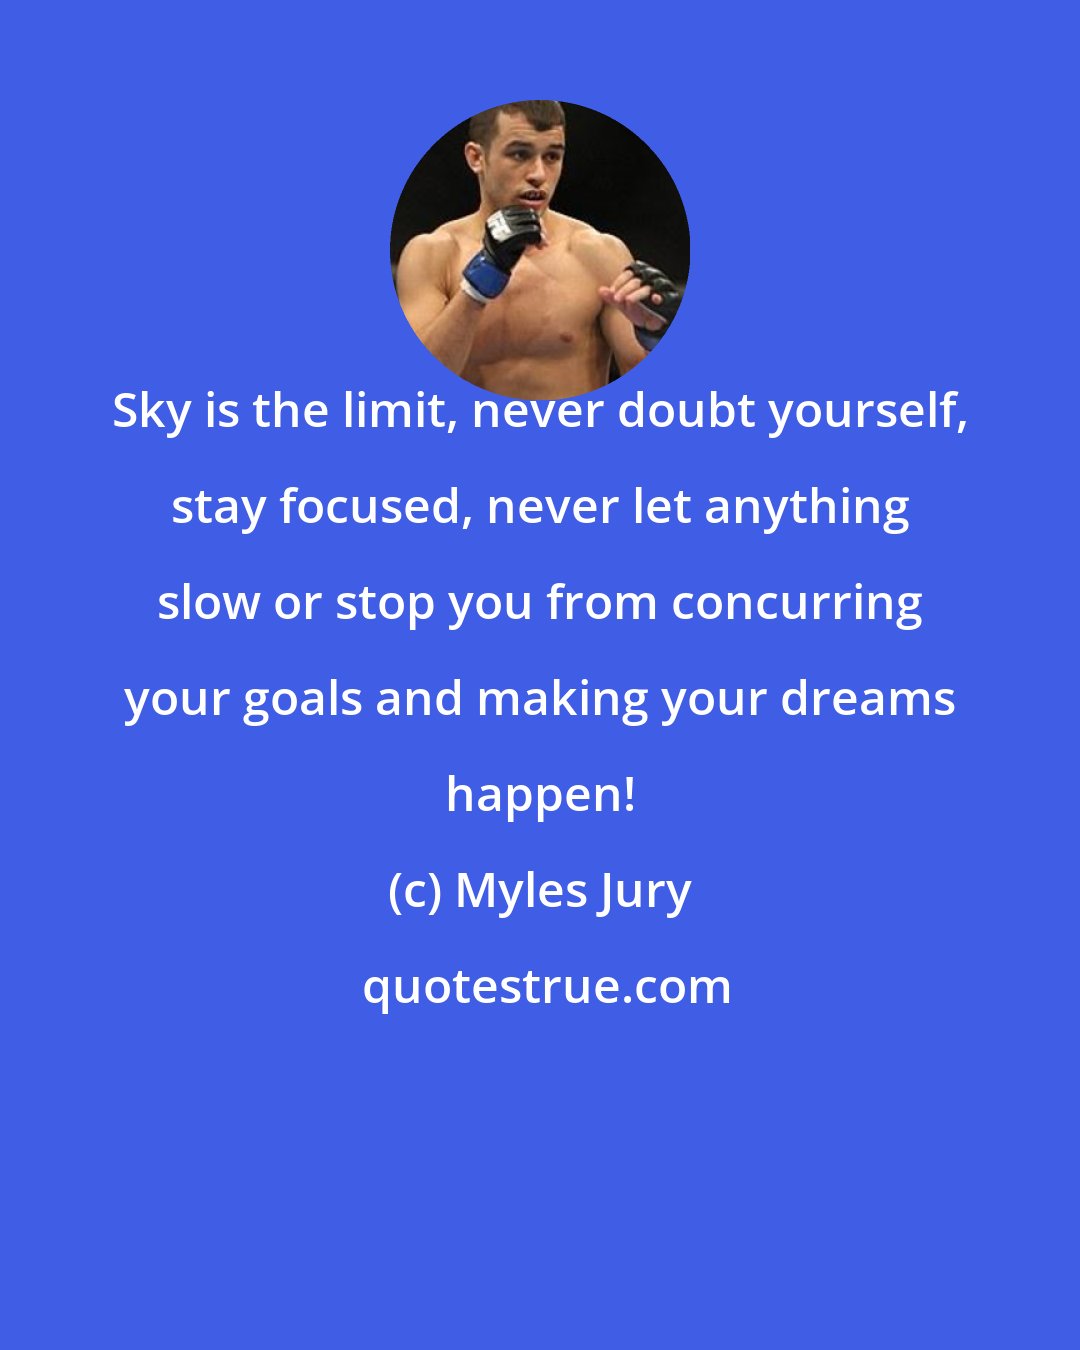 Myles Jury: Sky is the limit, never doubt yourself, stay focused, never let anything slow or stop you from concurring your goals and making your dreams happen!